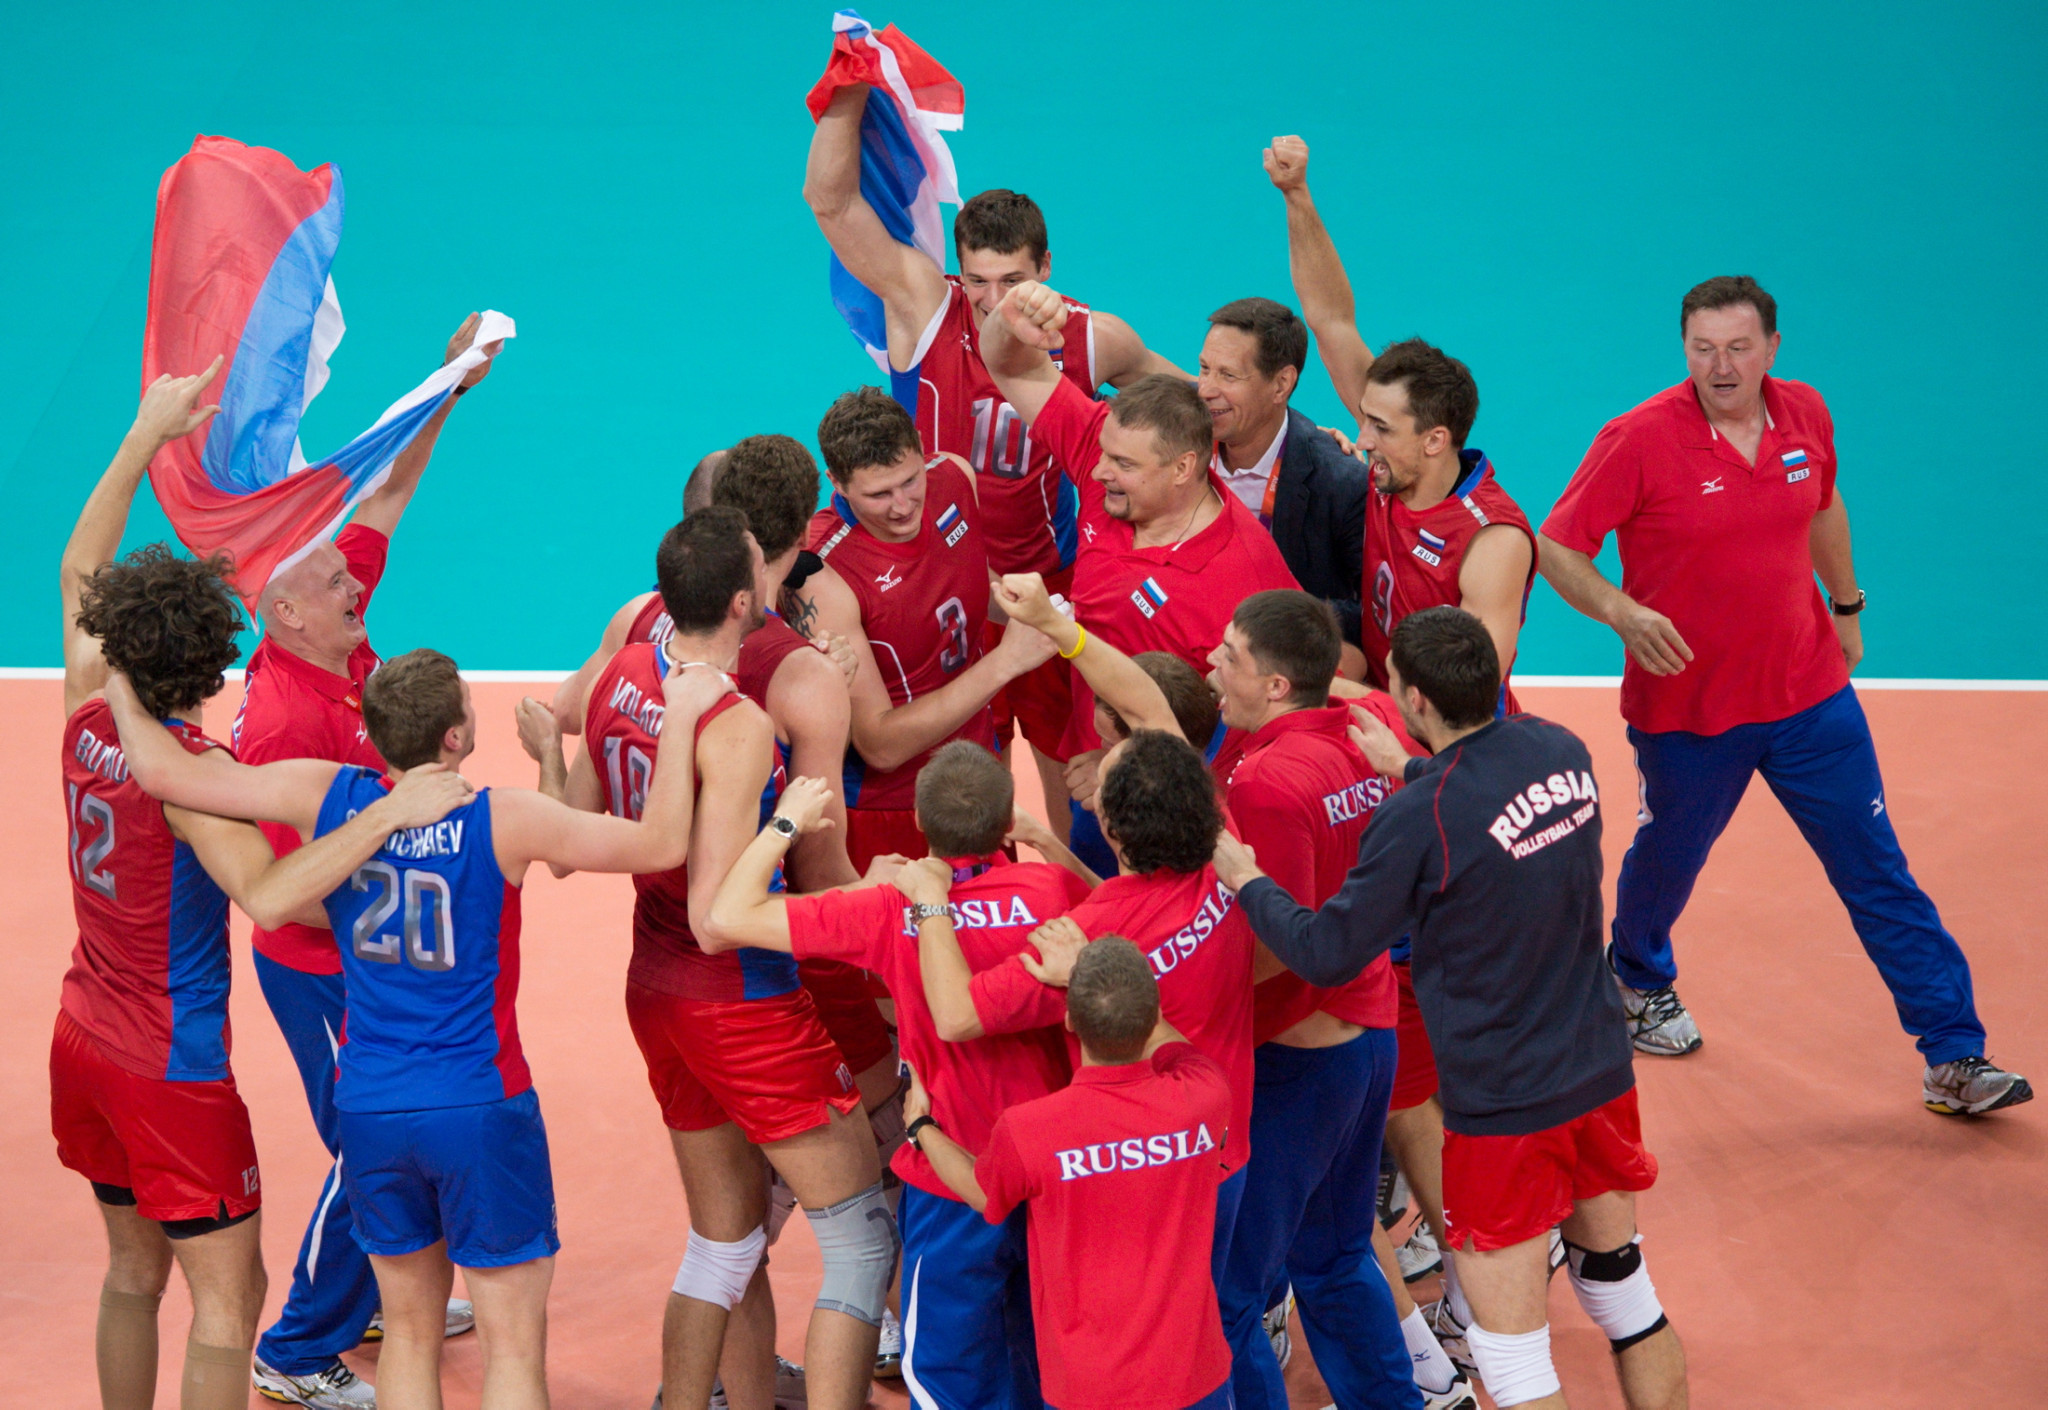 Volleyball has grown in popularity in Russia in recent years, the FIVB claim, thanks to the success of the men's team, including winning the Olympic gold medal at London 2012 ©FIVB